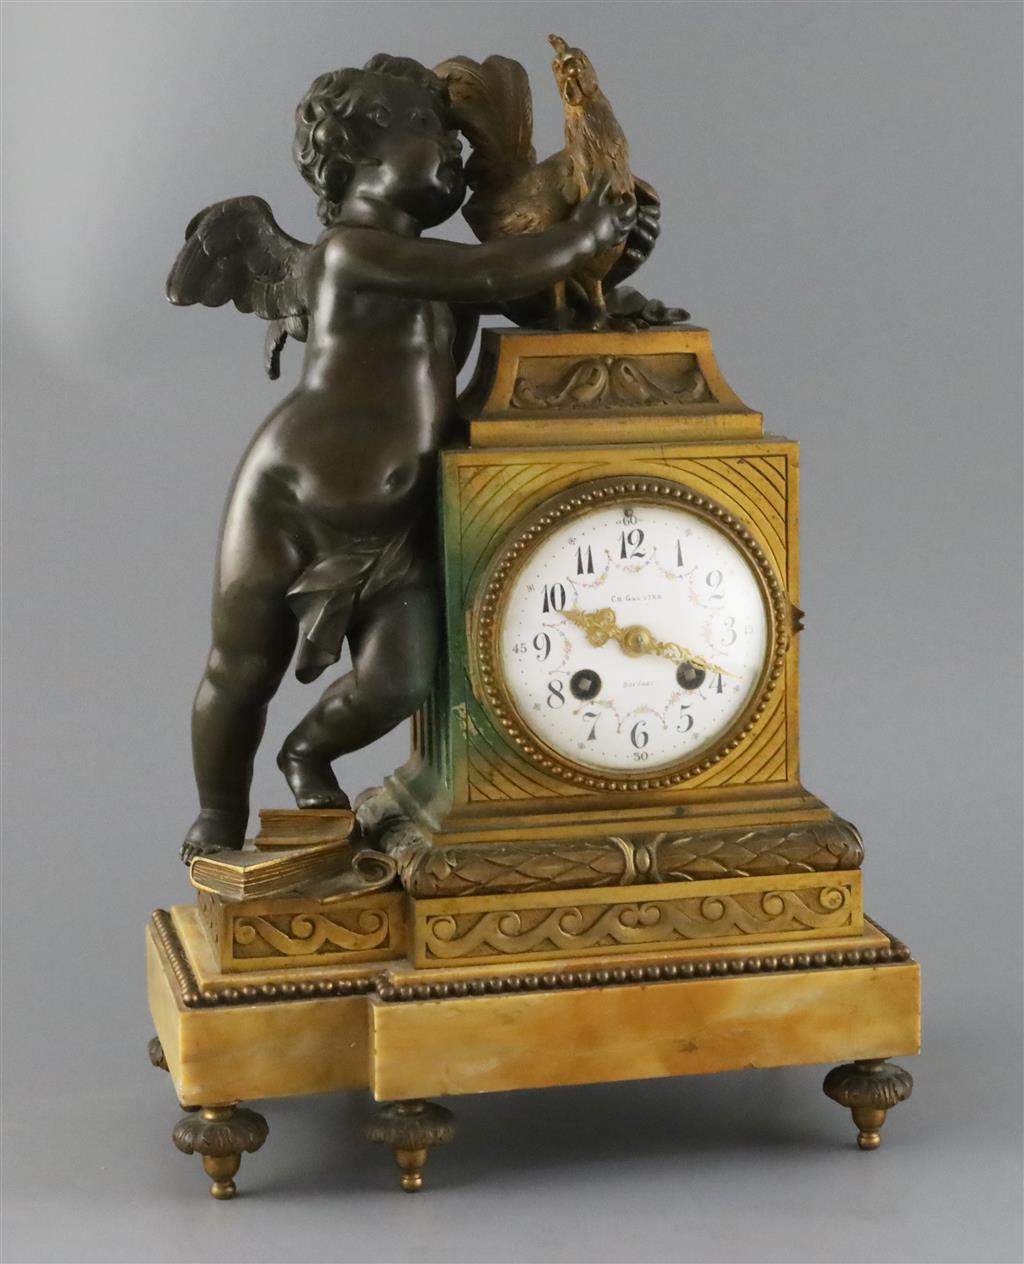 Ch. Gaultier, Bordeaux. A late 19th / early 20th century French bronze and ormolu mantel clock, height 15.75in. width 10.25in. depth 6i